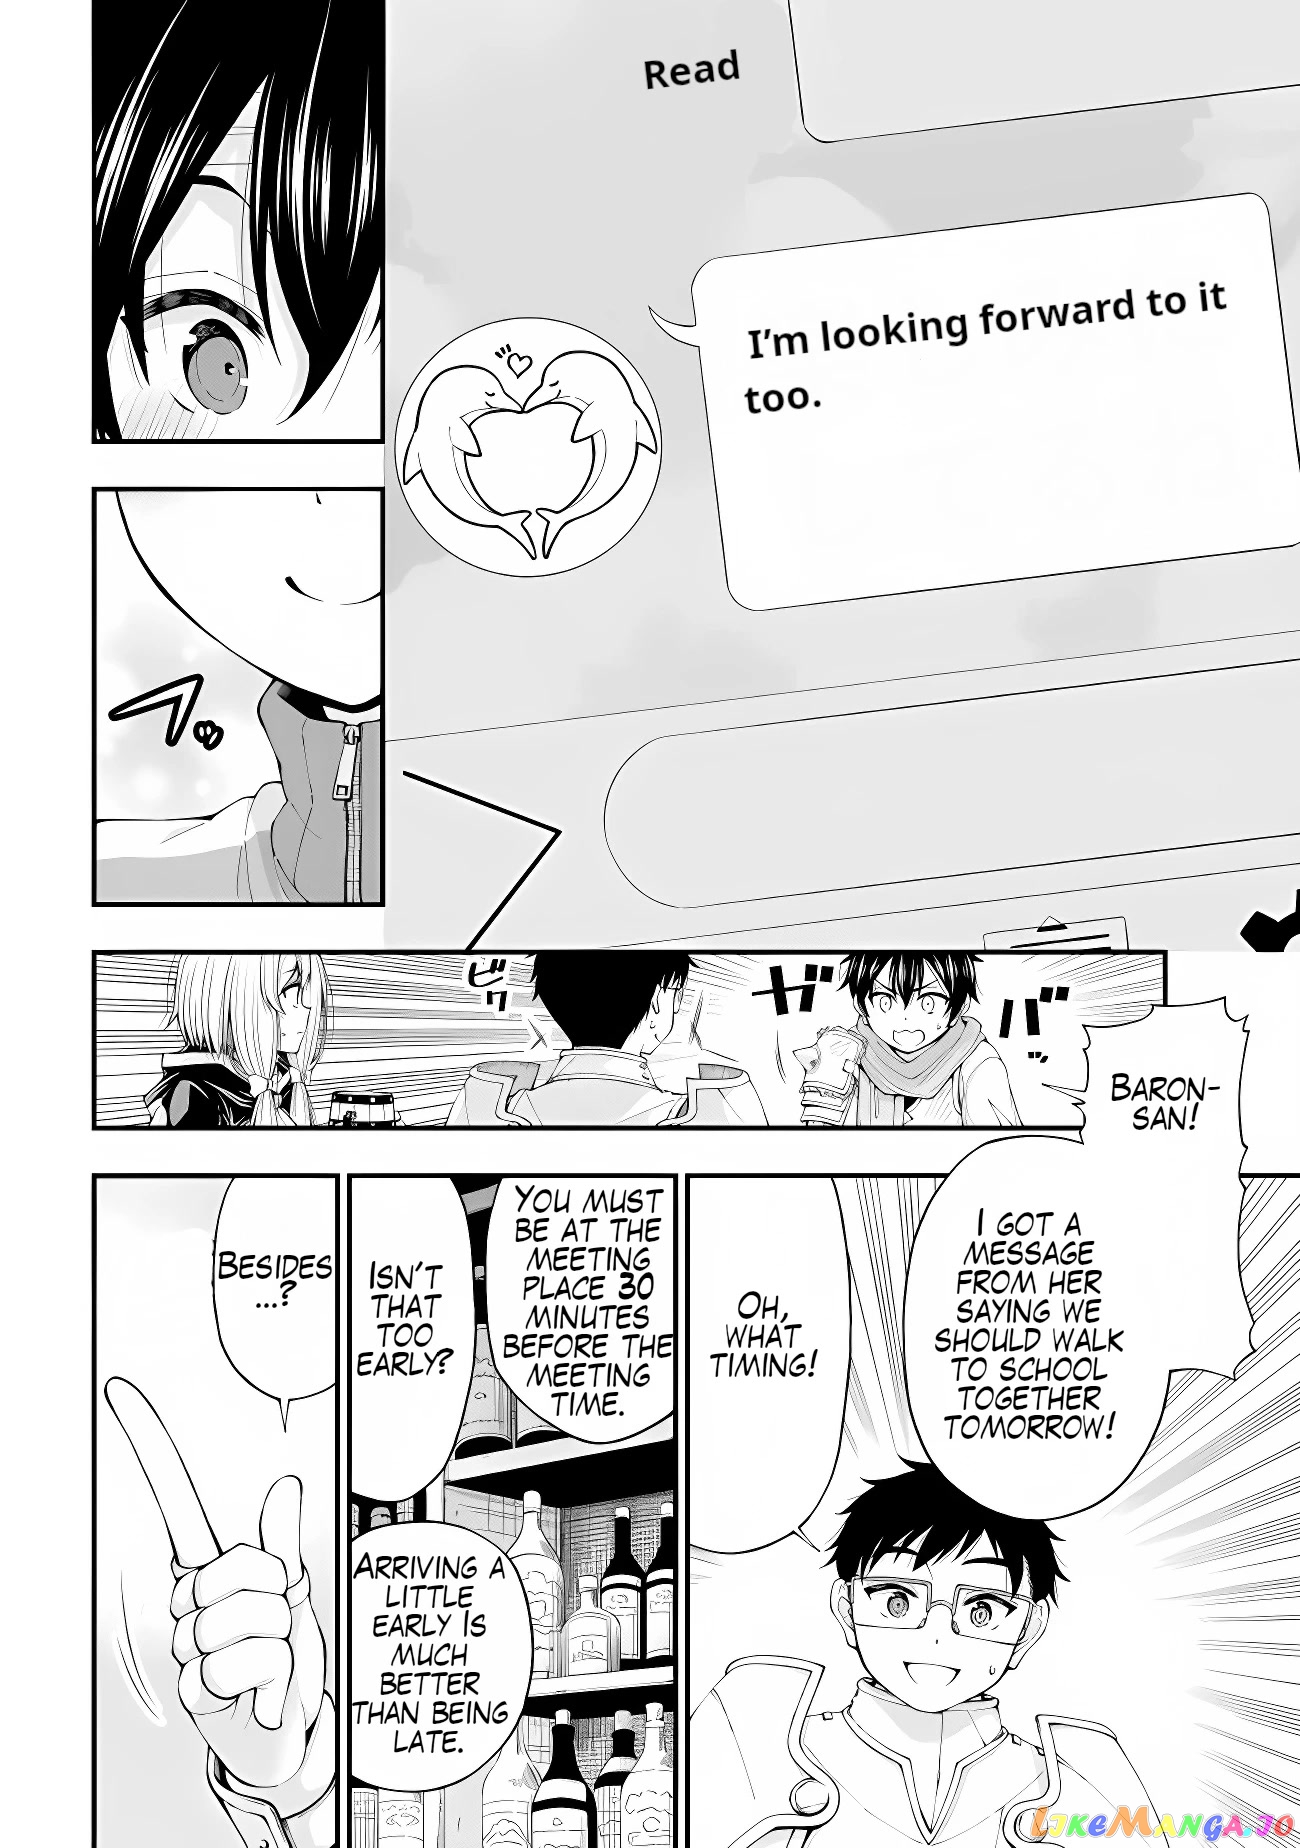 The Gal Who Was Meant to Confess to Me as a Game Punishment Has Apparently Fallen in Love with Me chapter 2 - page 18